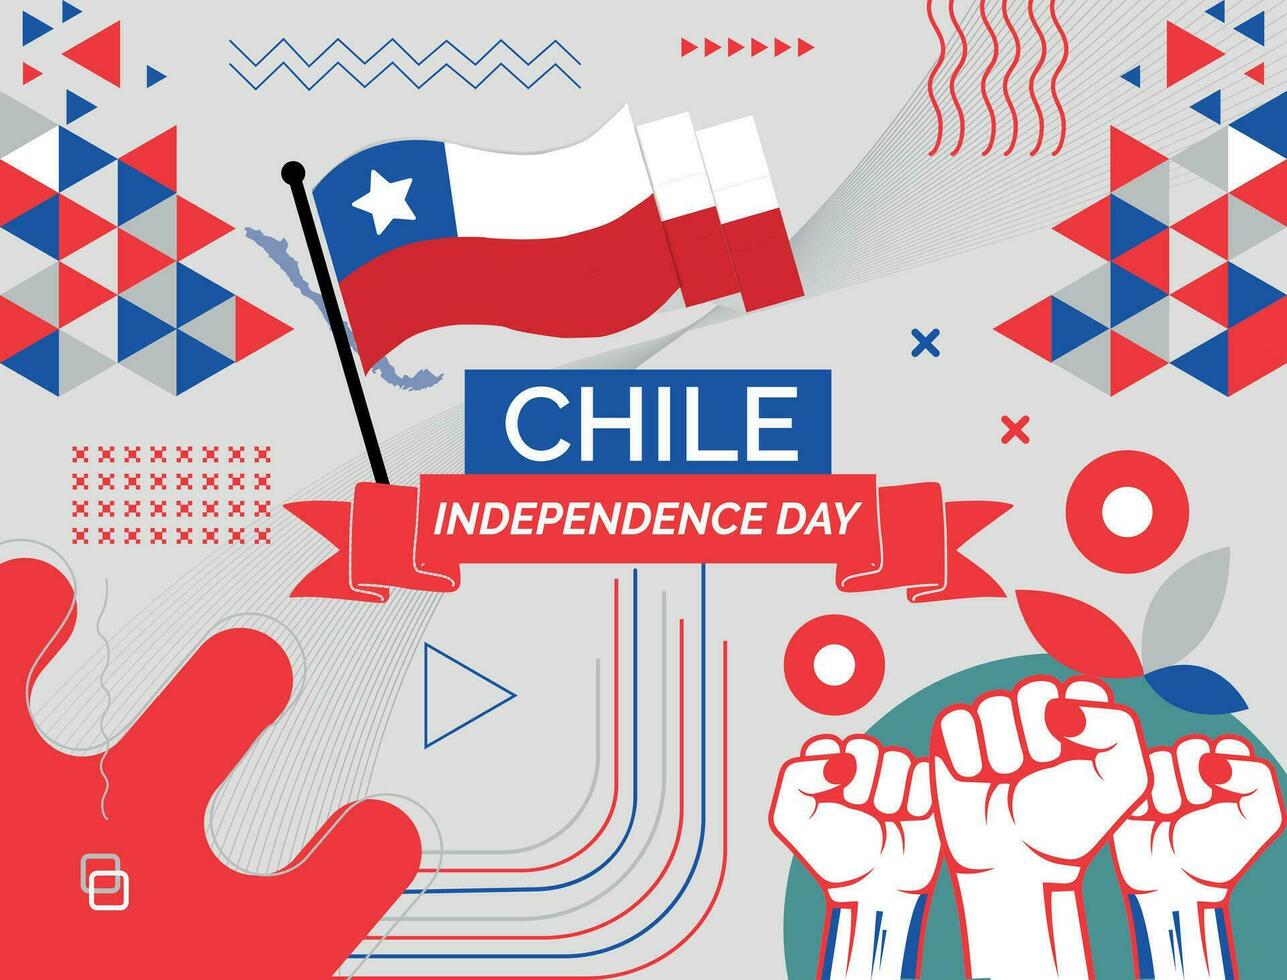 CHILE Map and raised fists. National day or Independence day design for CHILE celebration. Modern retro design with abstract icons. Vector illustration.